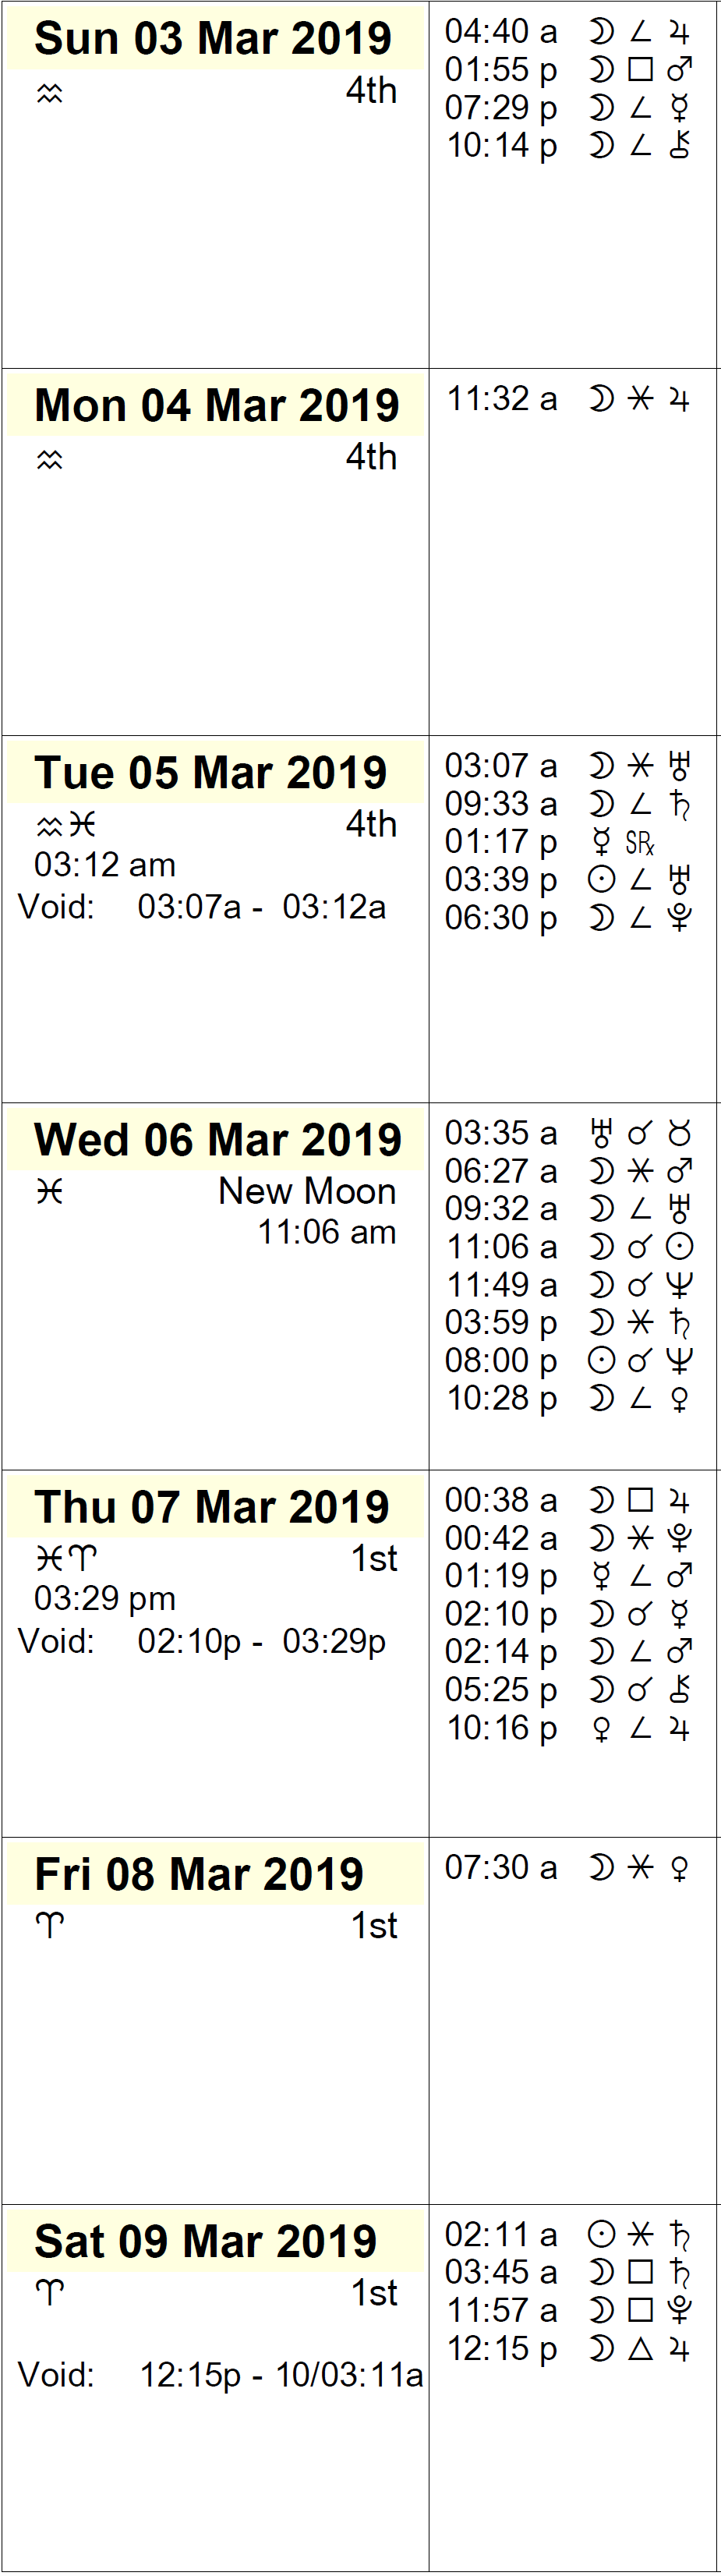 This Week in Astrology Calendar: March 3 to 9, 2019